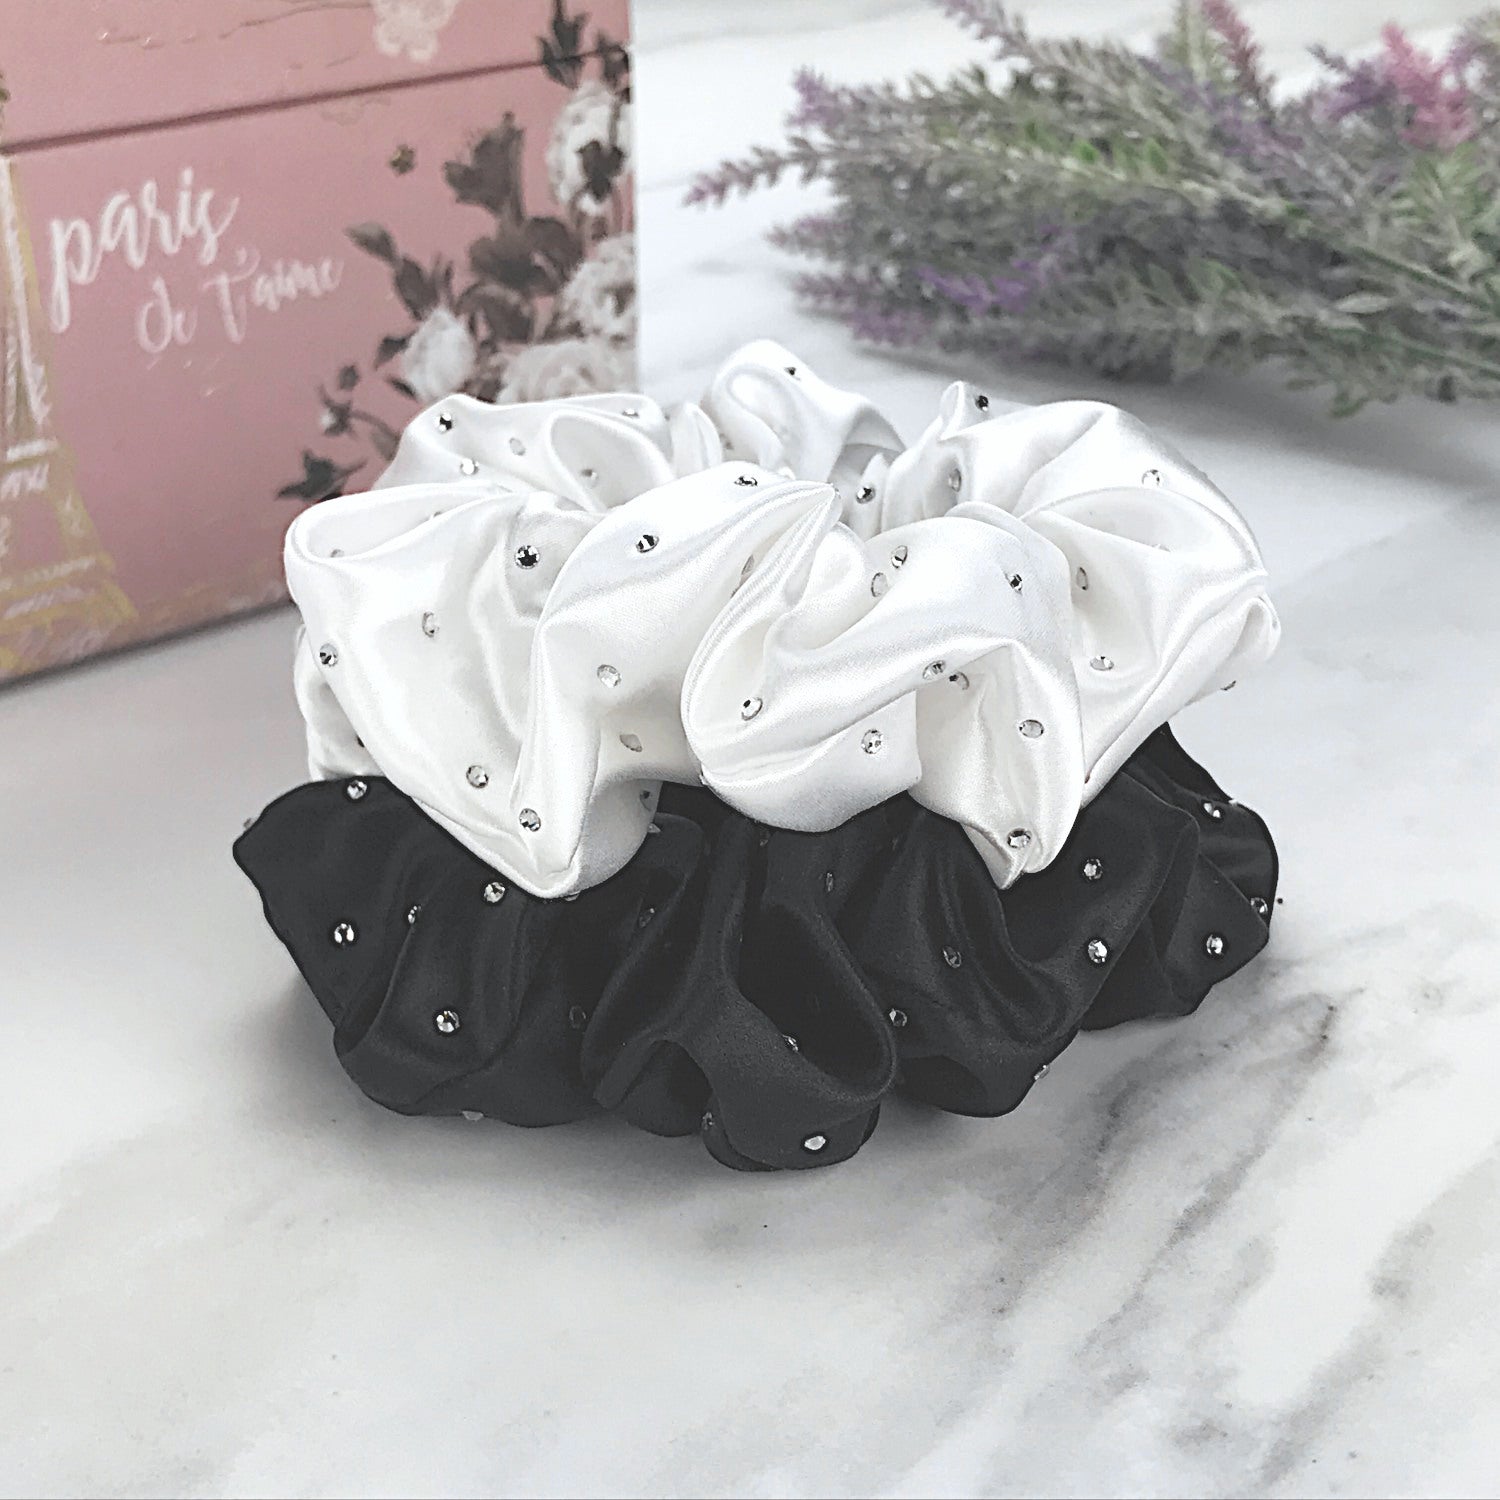 Celestial Silk scrunchies with crystals, silk hair ties with rhinestones black and white silk hair scrunchies on marble table with lavender and pink jewelry box